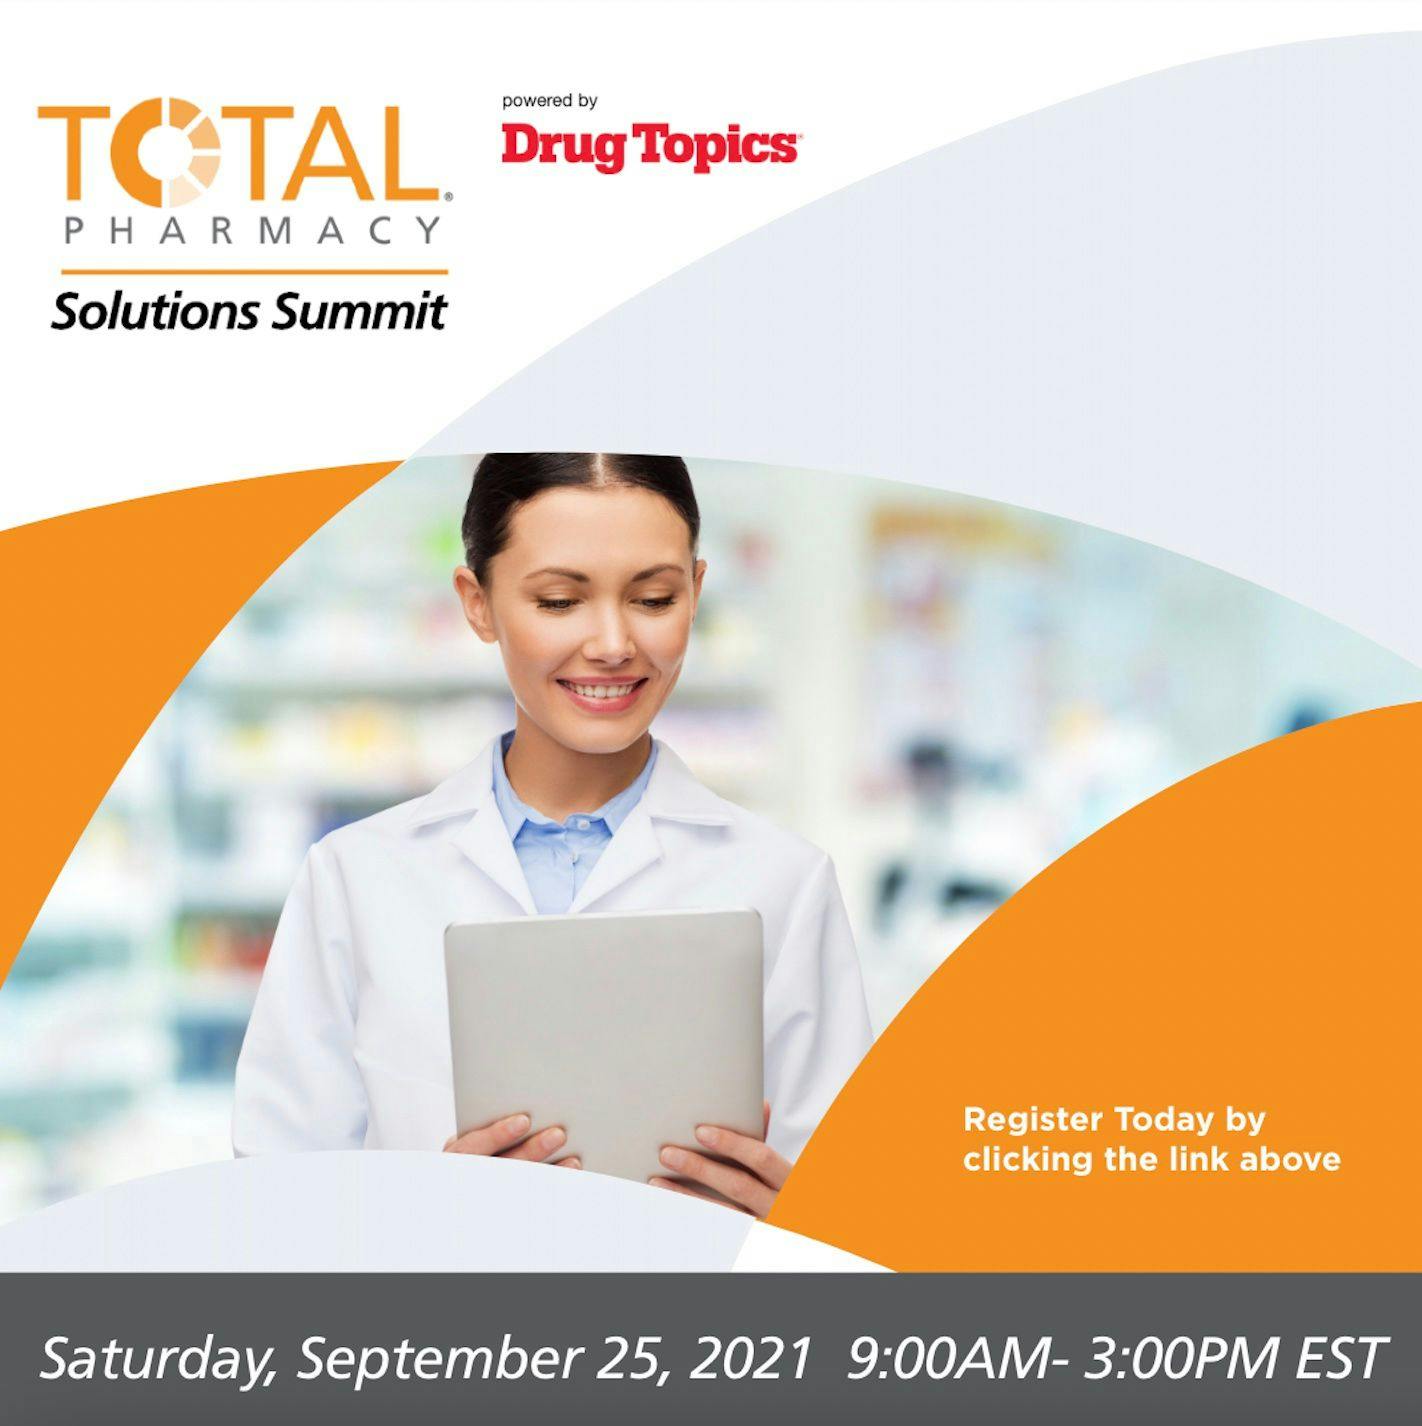 Total Pharmacy Solutions Summit: Patient Access, Empowerment Issues and Solutions